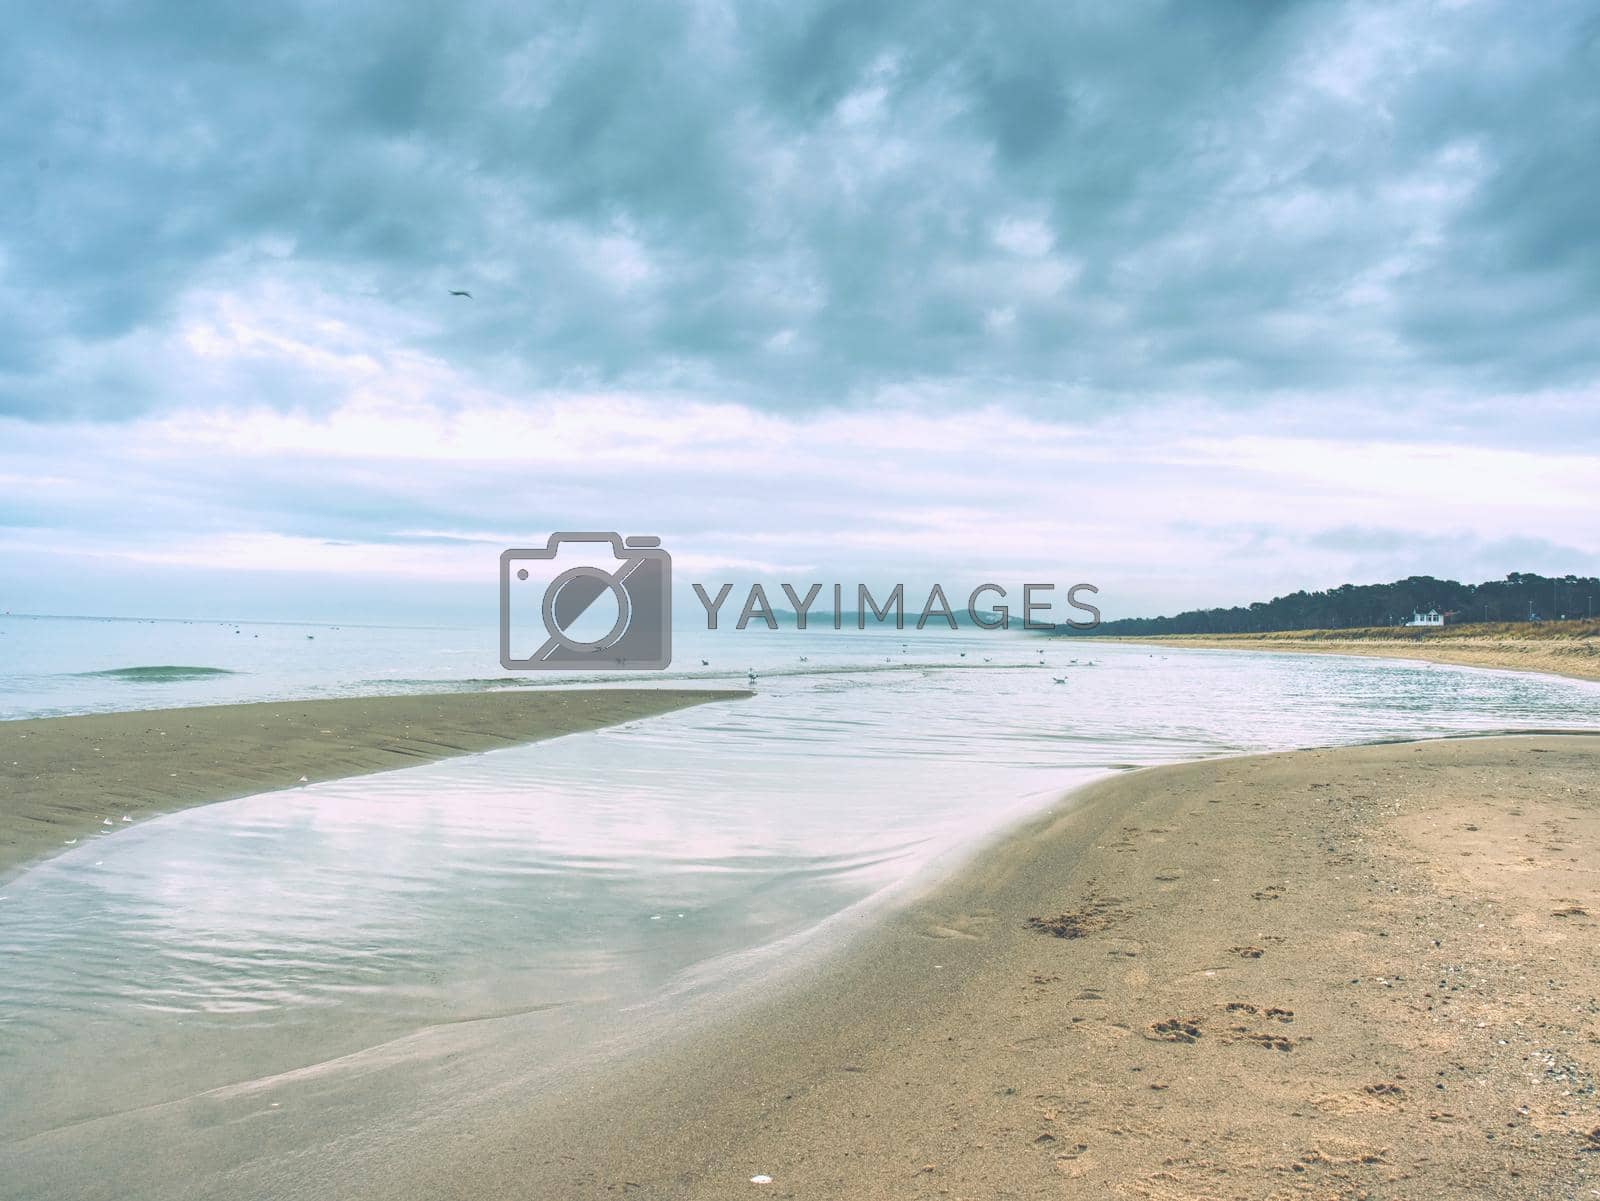 Royalty free image of Footprints of bare feet on wet sand of beach  by rdonar2